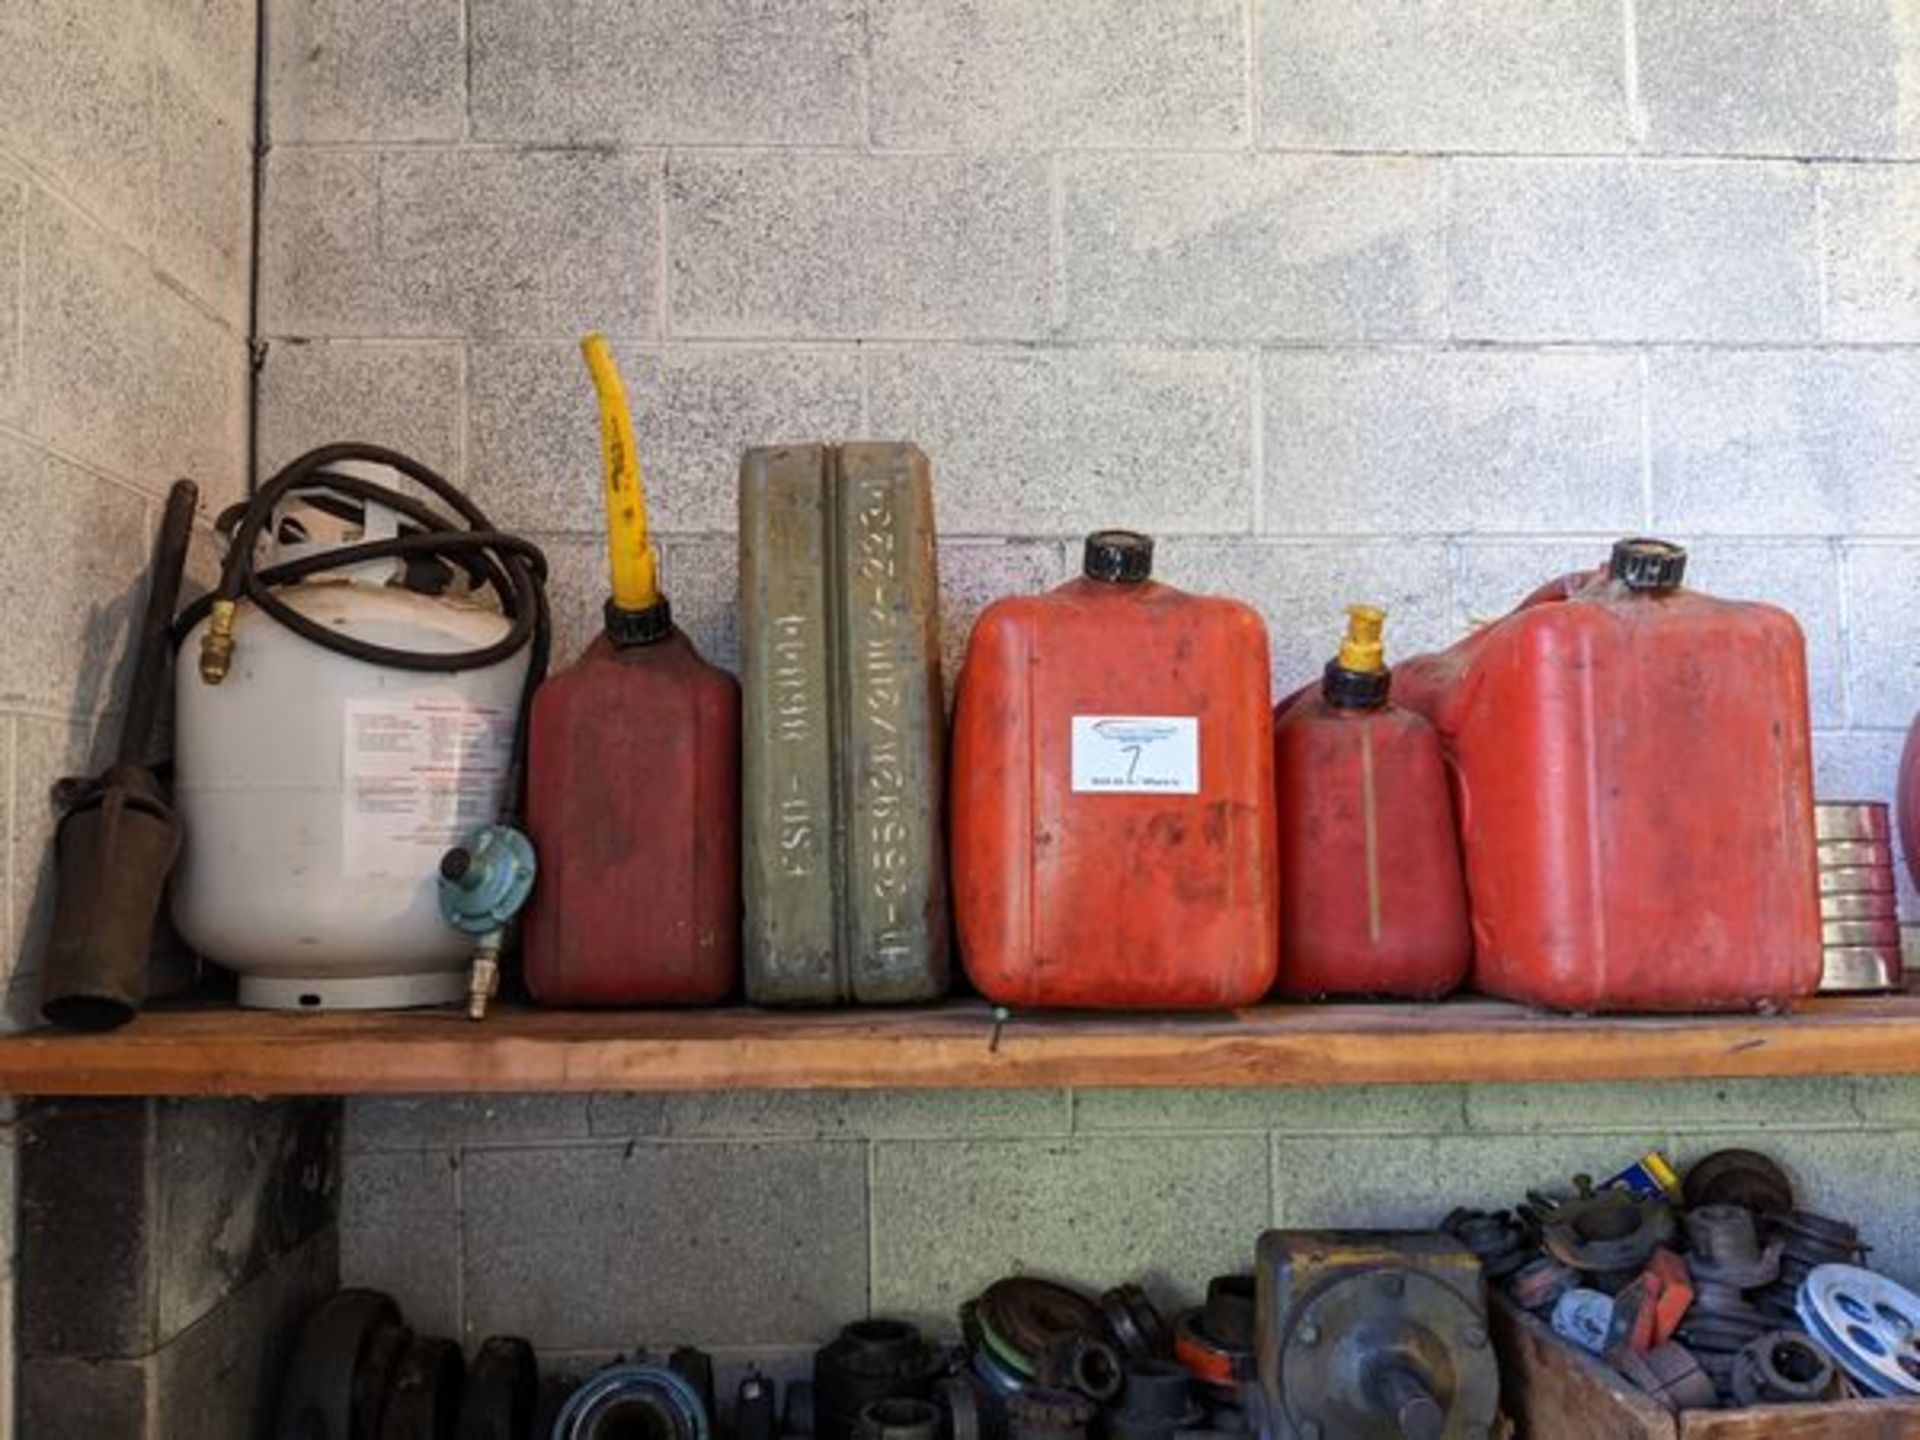 5 Fuel Containers, Propane Tank and Tiger Torch